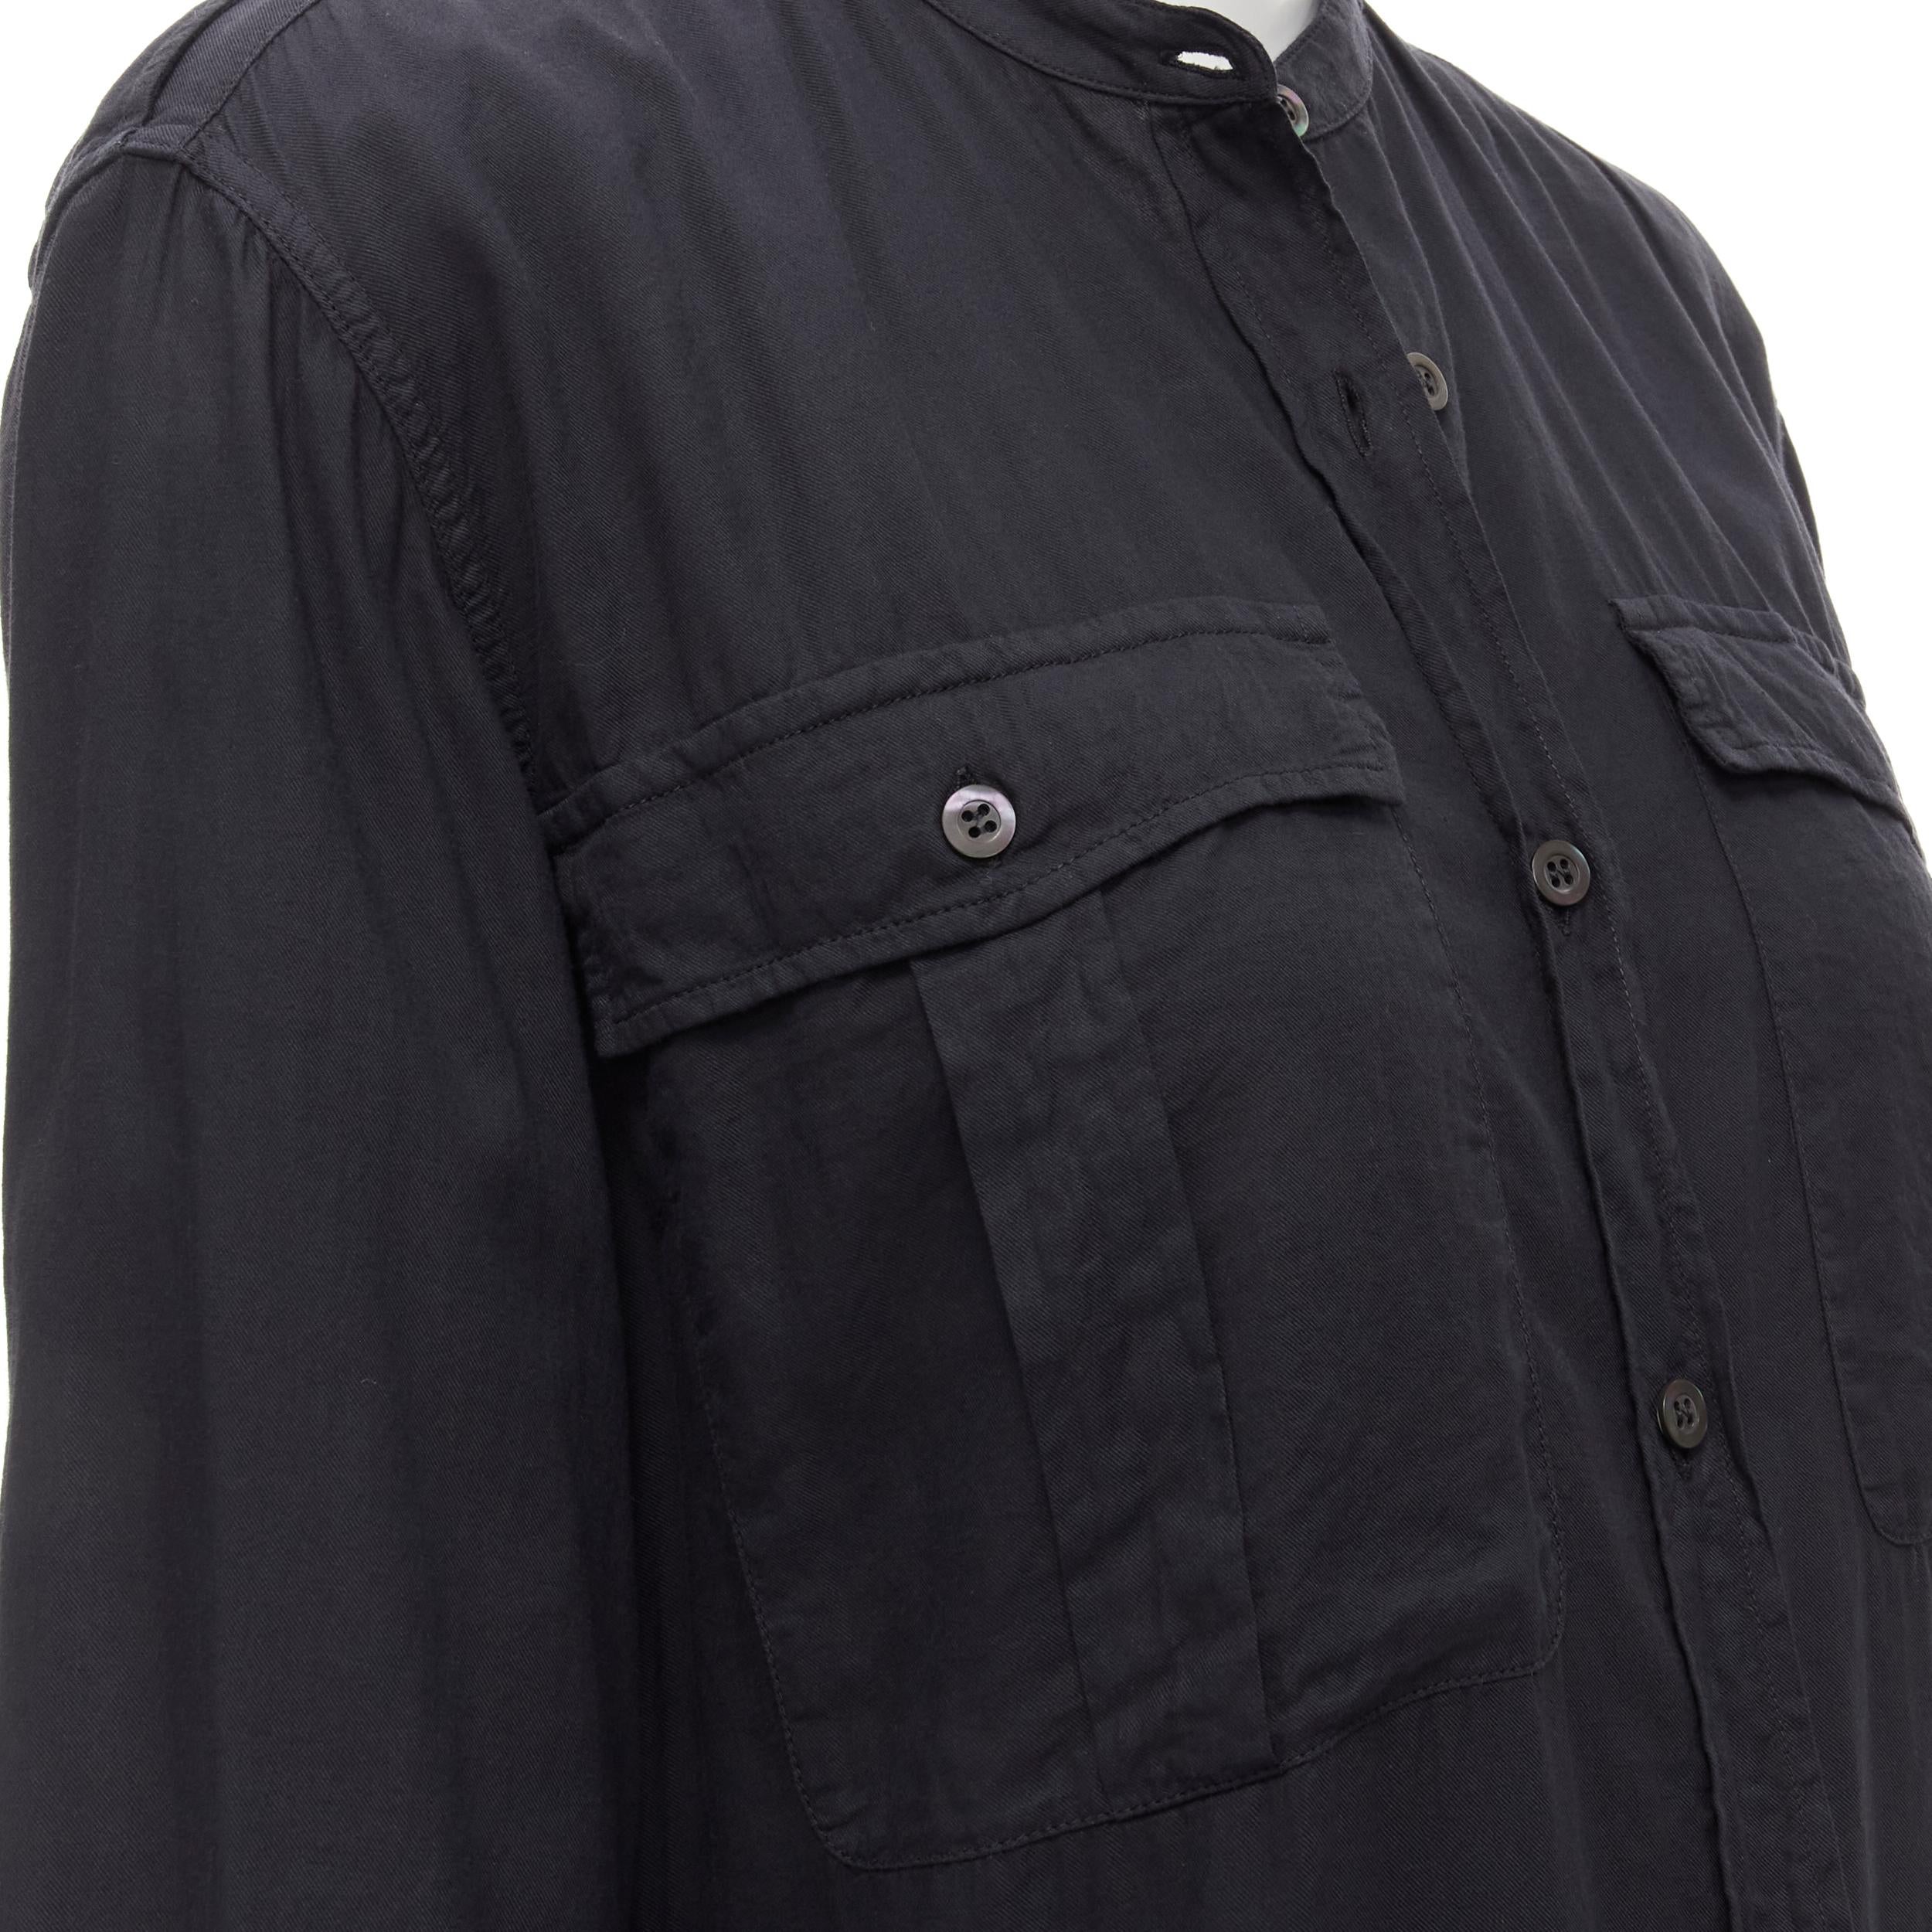 DRIES VAN NOTEN black washed cotton cargo pocket button front shirt FR36 XS 
Reference: CELG/A00166 
Brand: Dries Van Noten 
Designer: Dries Van Noten 
Material: Cotton 
Color: Black 
Pattern: Solid 
Closure: Button 
Made in: Hungary 

CONDITION: